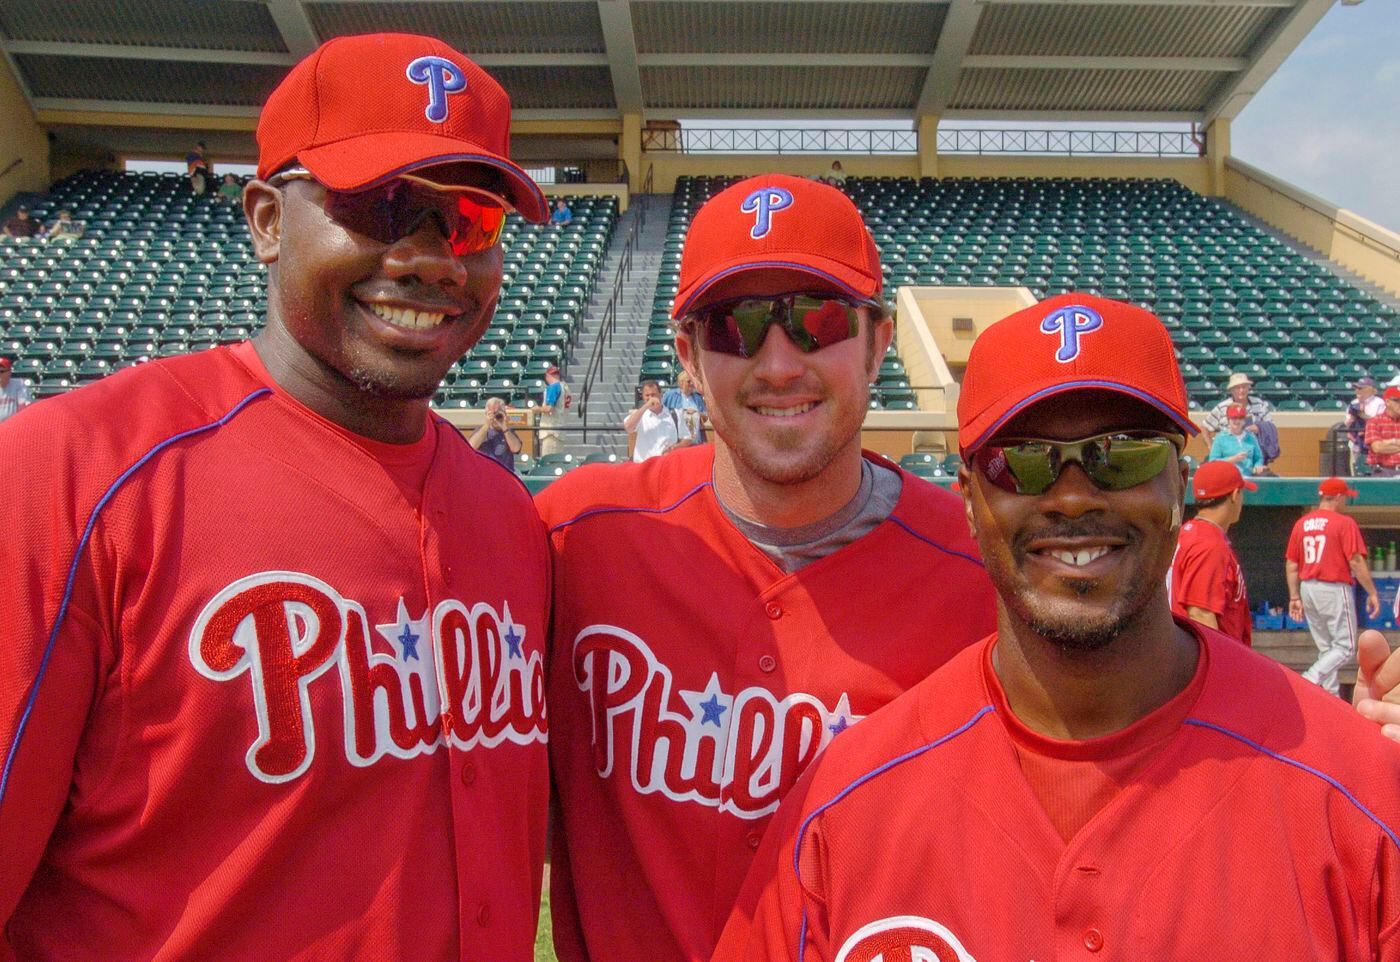 Retiring Dick Allens Number Allows Phillies To Honor The 2008 Stars 